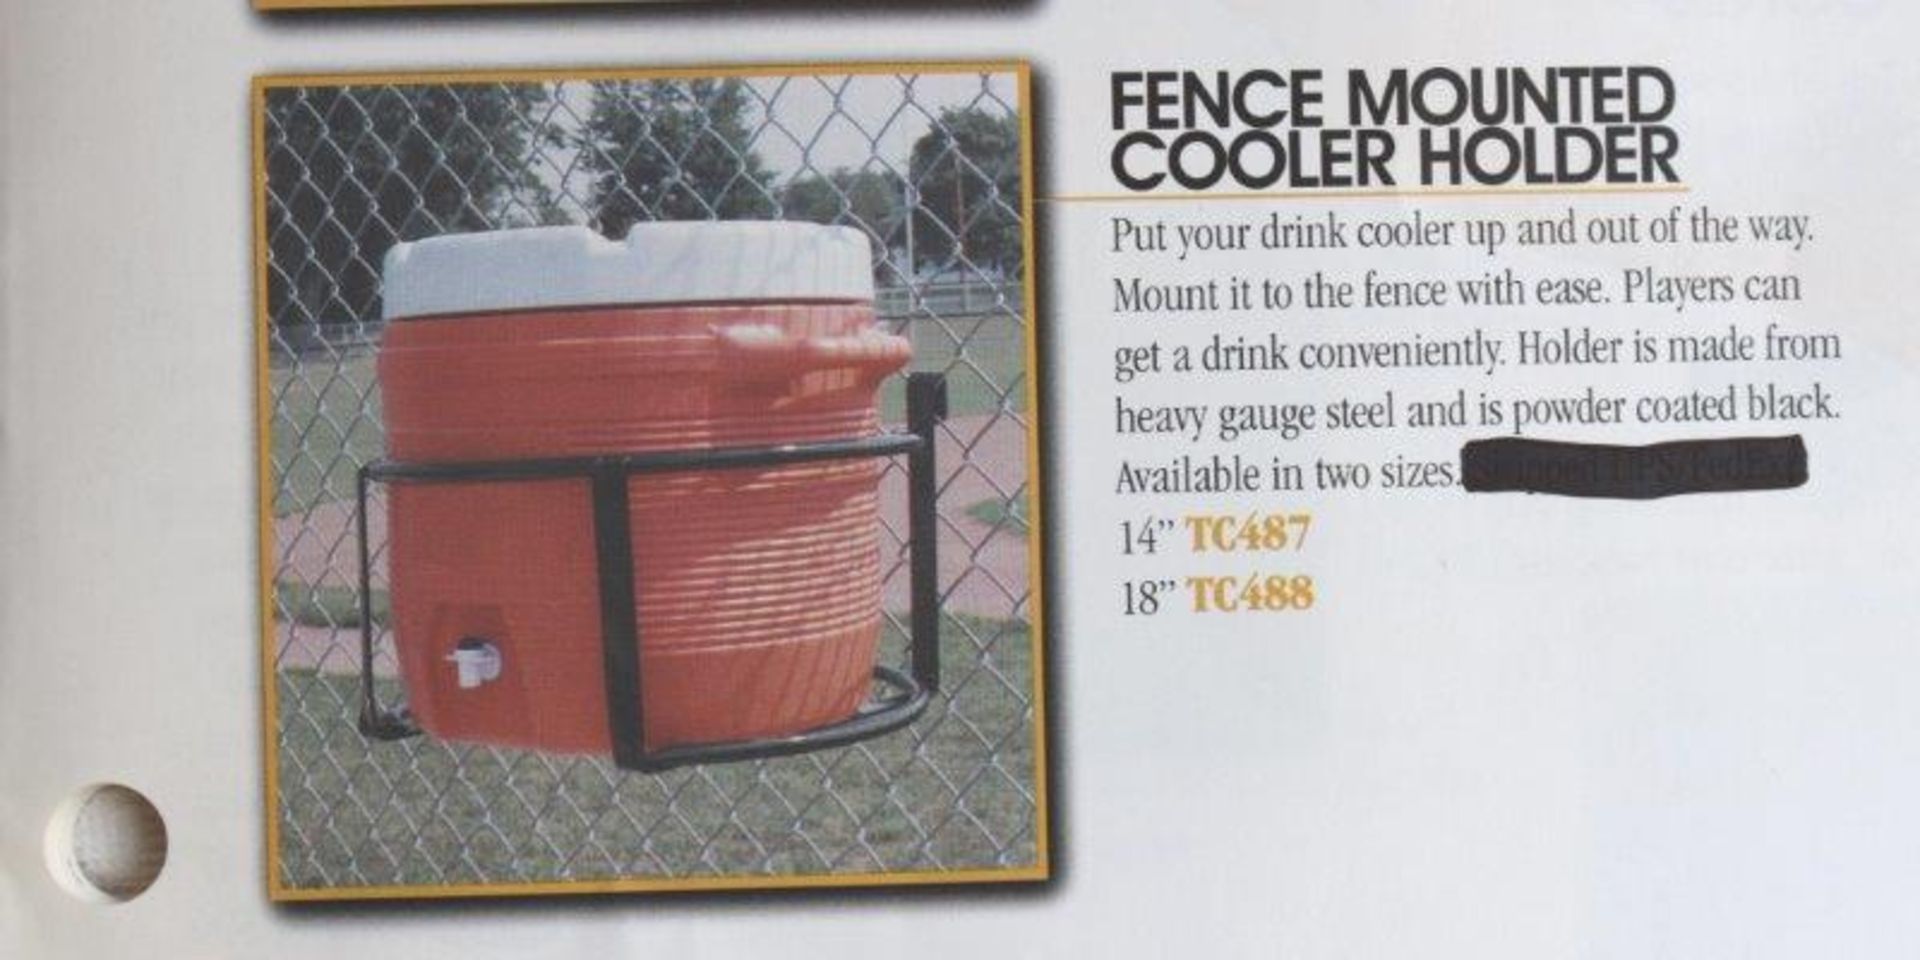 Lot of 3) MTC 488 & 1) MTC 487, Fence Mounted Cooler Holders - Image 2 of 2